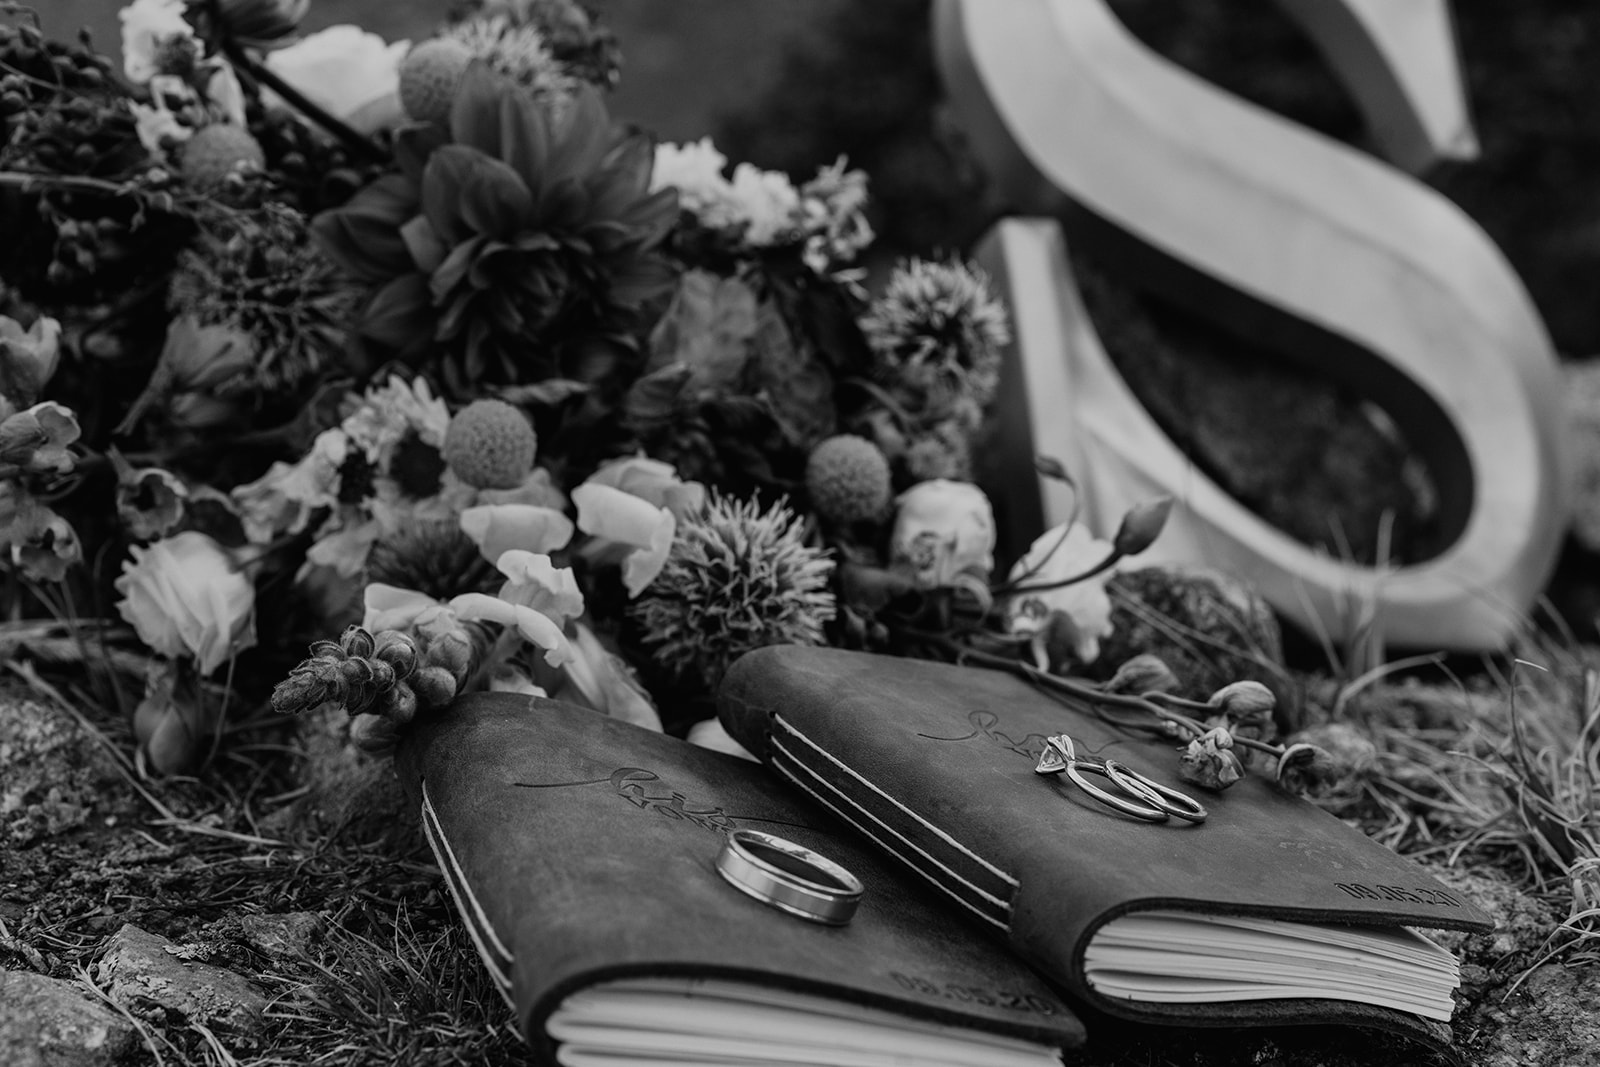 Black and white photo of Bride and groom vow books, flowers, and details